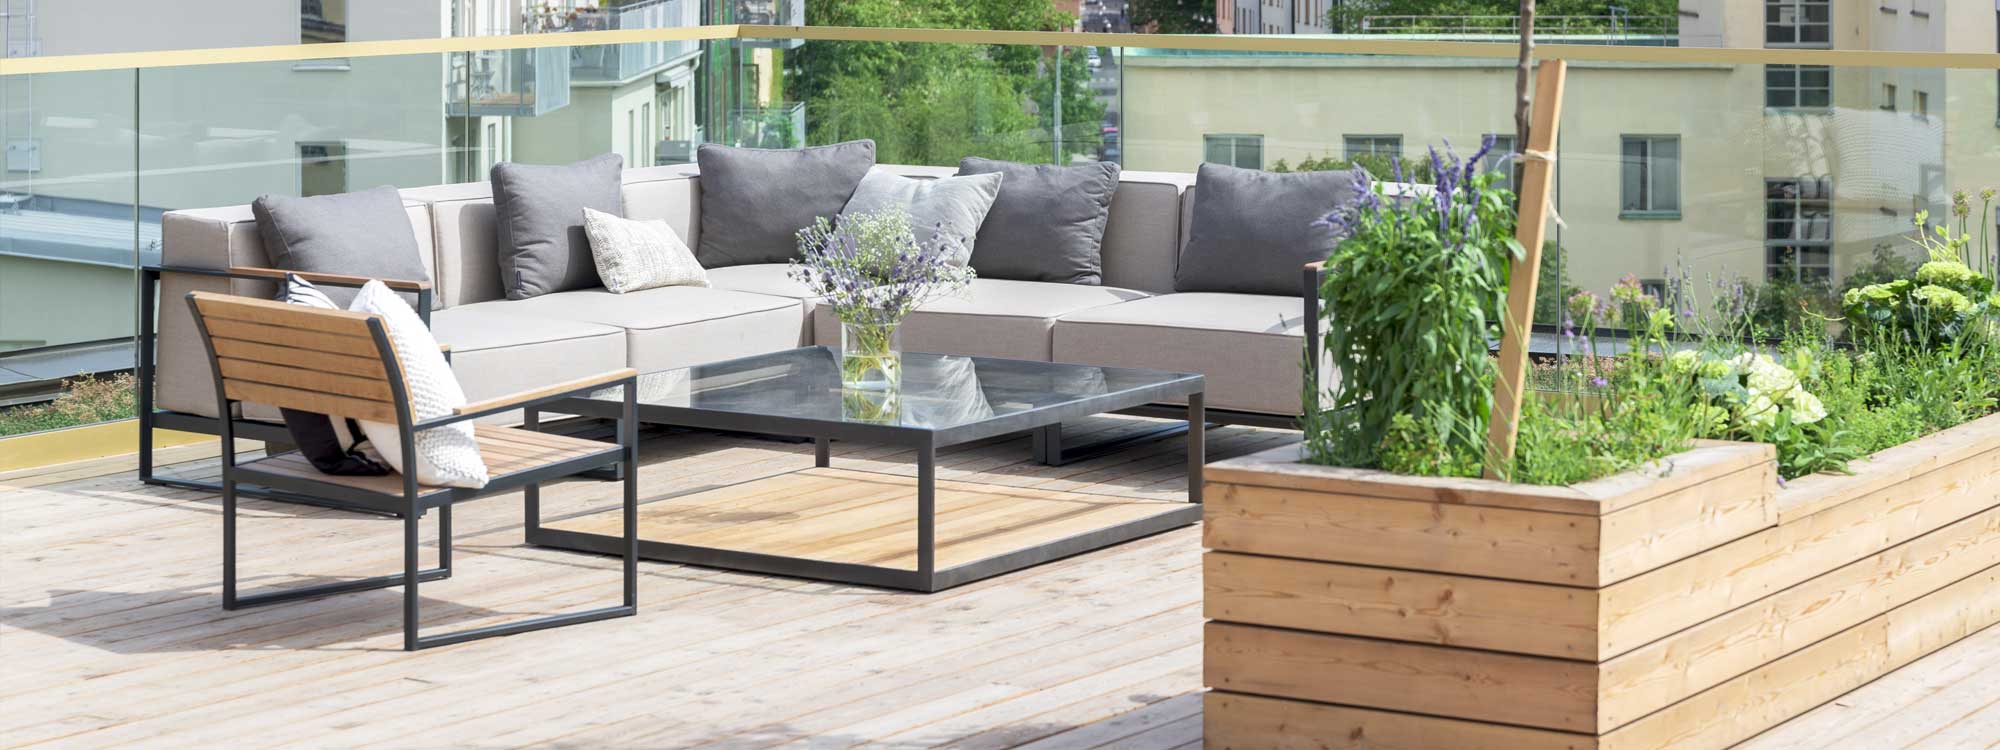 Image of Roshults Moore modular garden corner sofa on terrace with rooftops and buildings in the background